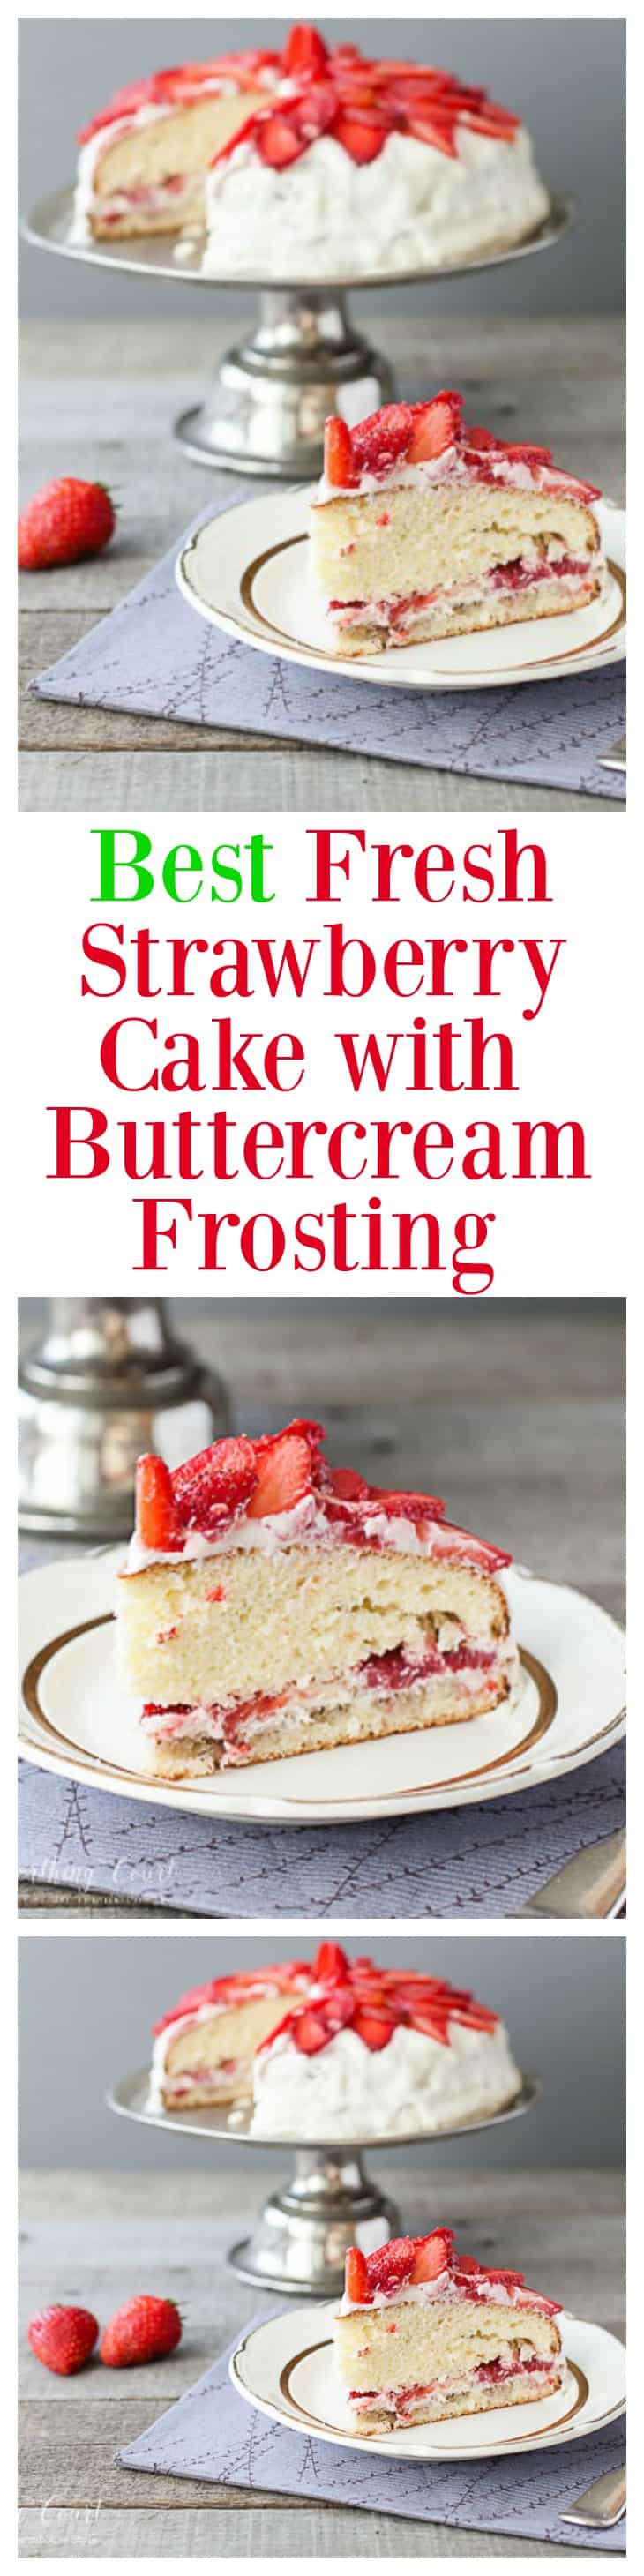 This strawberry cake recipe is one of my favorite ways to enjoy fresh strawberries. It's easy to put together because it starts out with white cake mix and strawberry gelatin. Only a few more ingredients are needed. It has the best strawberry flavor and is wonderfully moist. The only thing that makes the cake better is the buttercream frosting!